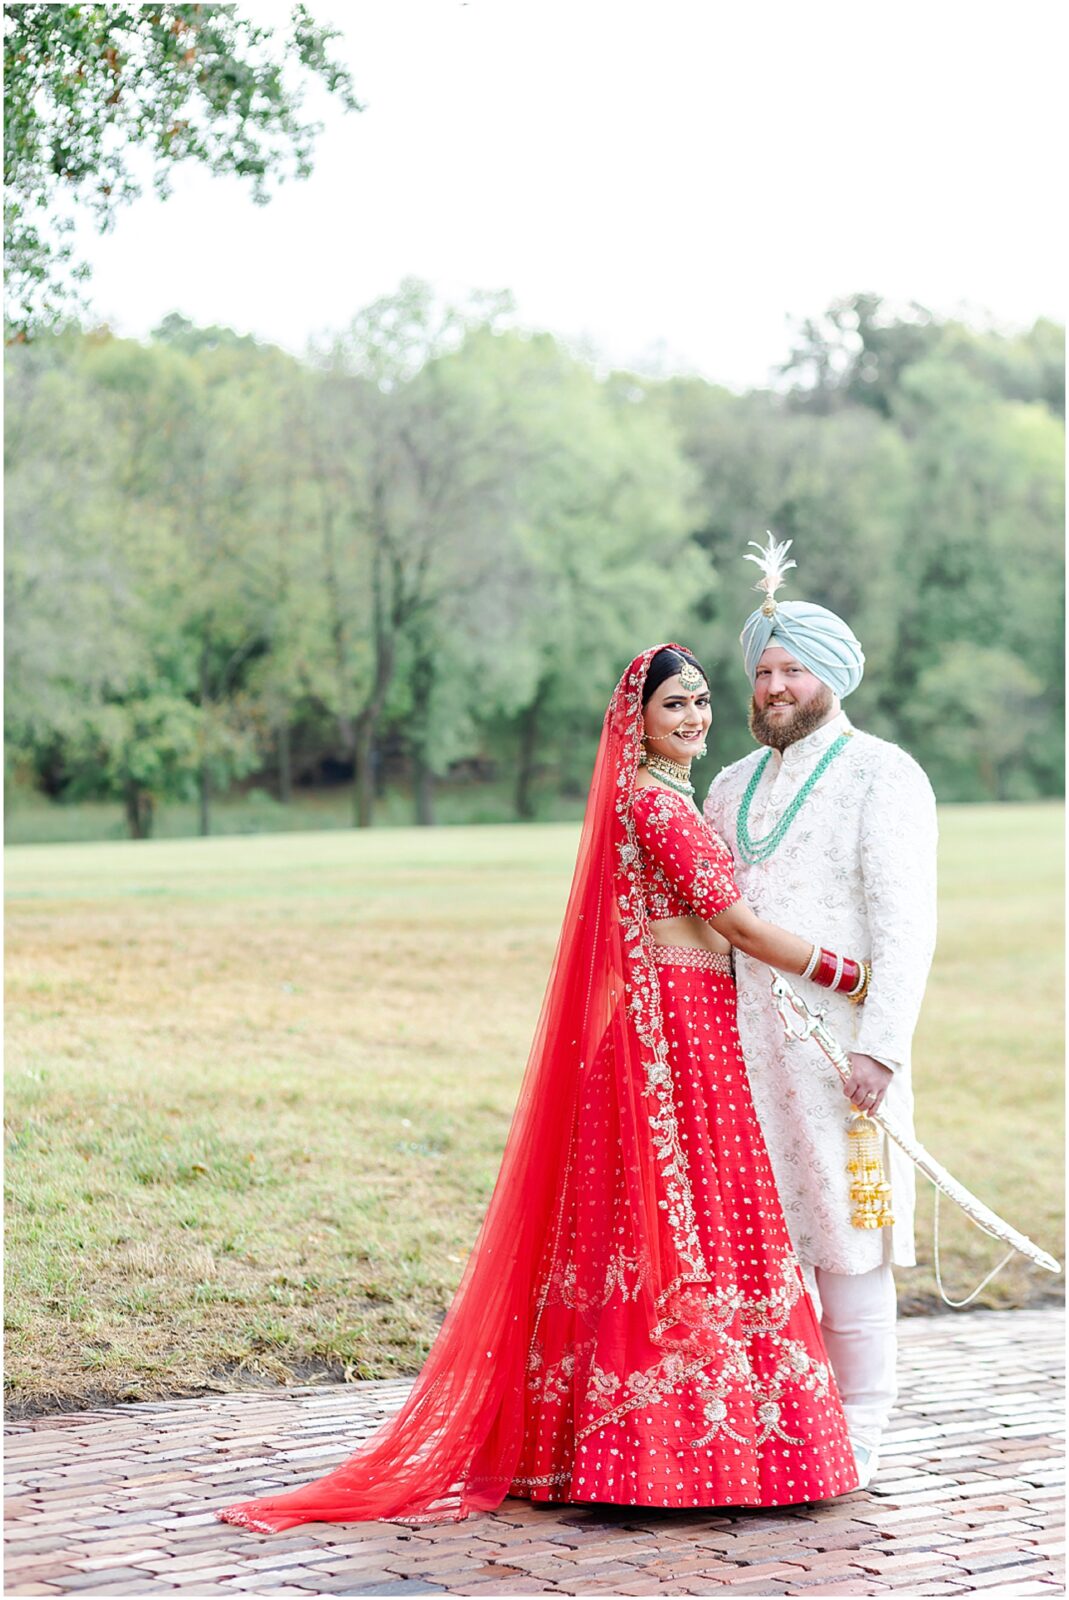 South Asian Bridal Portraits of Elegance - A Glimpse into an Indian Fusion Sikh Wedding at Kansas Mildale Farms, featuring Sangeet, henna, baraat, dholi, by Mariam Saifan Photography - Your Kansas City Wedding Photographer